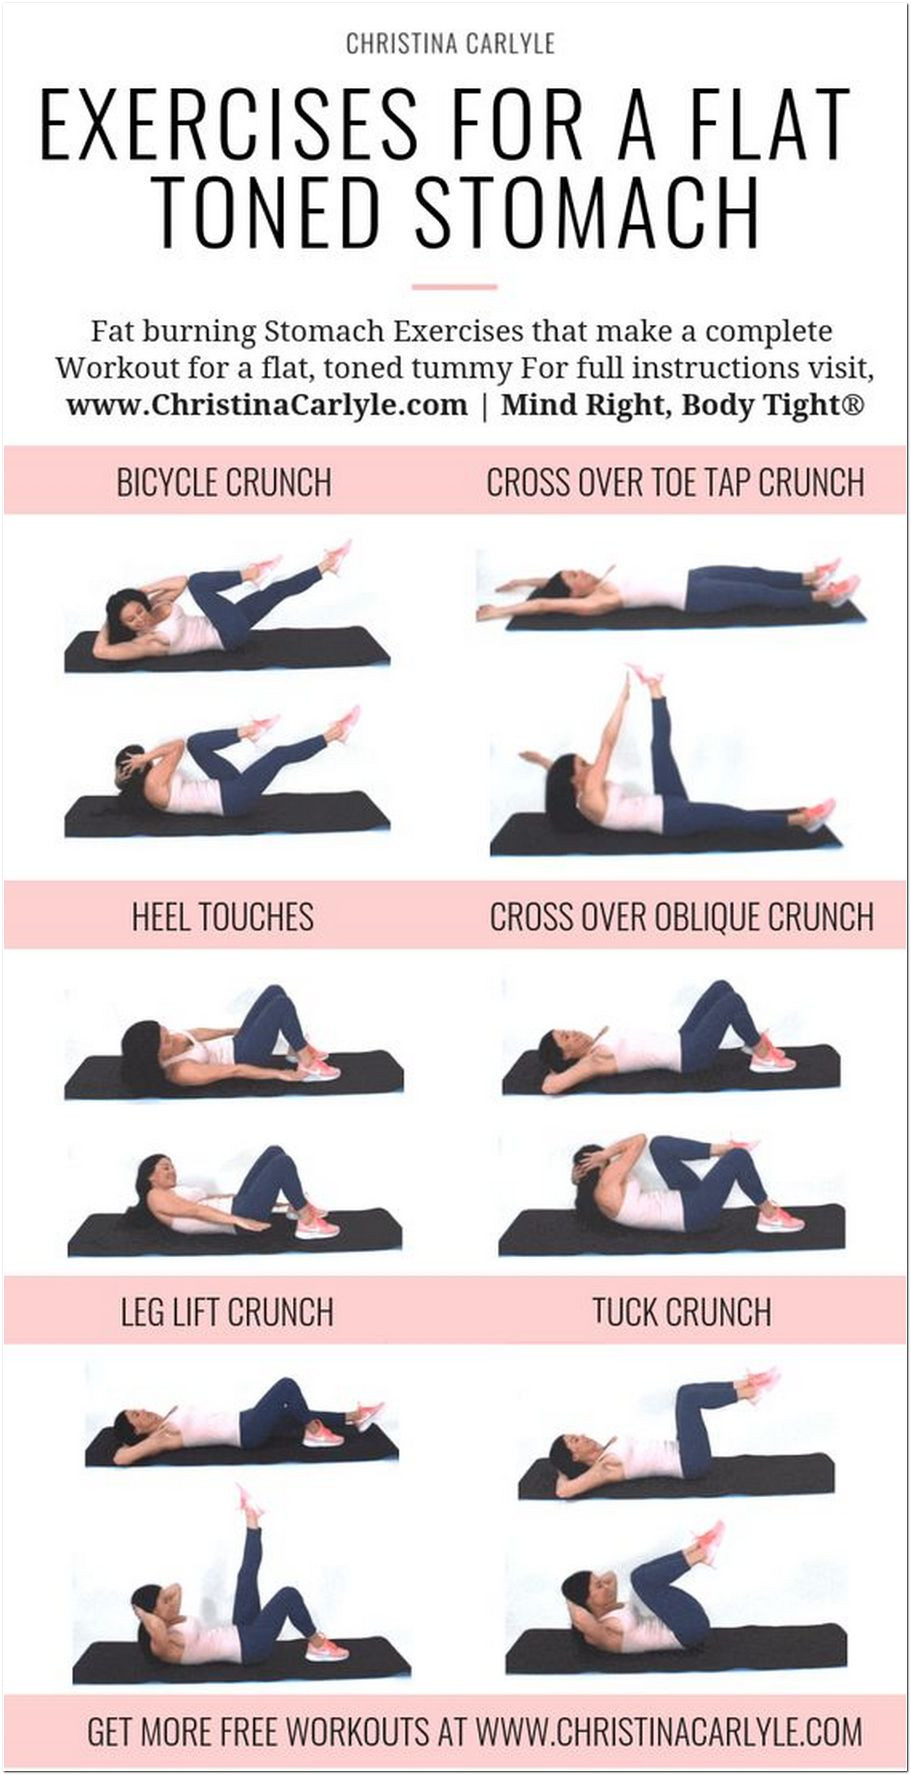 Fat Burning Workout At Home Flat Stomach
 77 Fat Burning Stomach Exercises For A Flat Toned Tummy 13